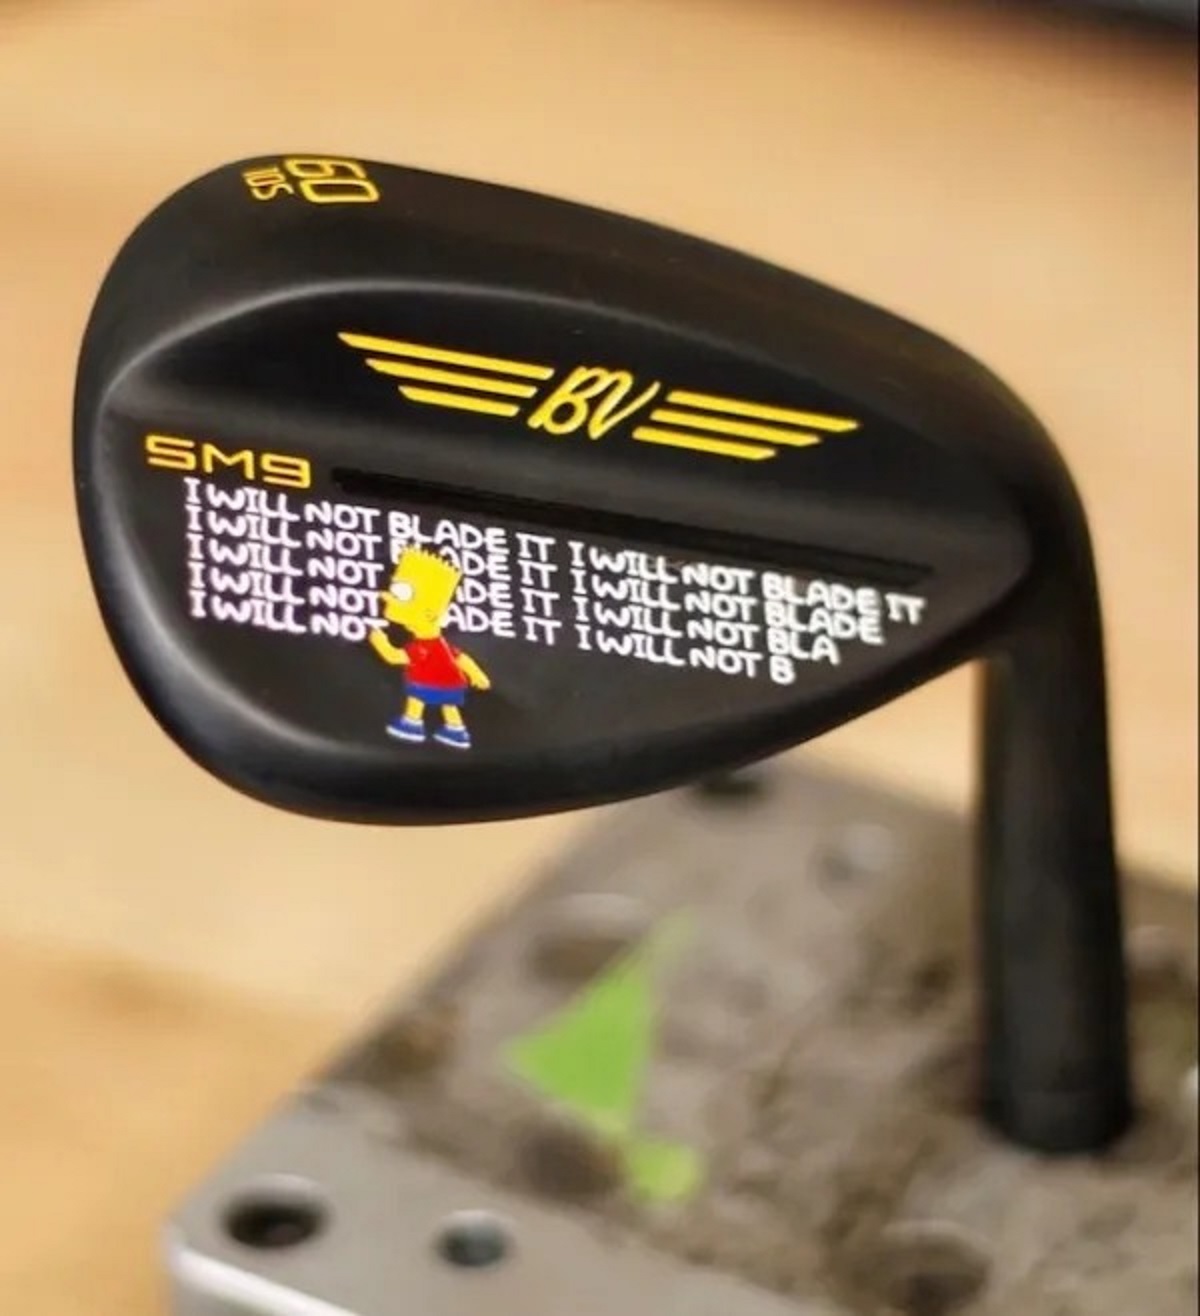 gap wedge - 1345 Bv SM9 Iwill Not Blade It Iwill Not Blade It Iwill Not Fade It Iwill Not Blade Iwill Not Twill Not Ade It Iwill Not Bla Ade It Iwill Not B Twill Not